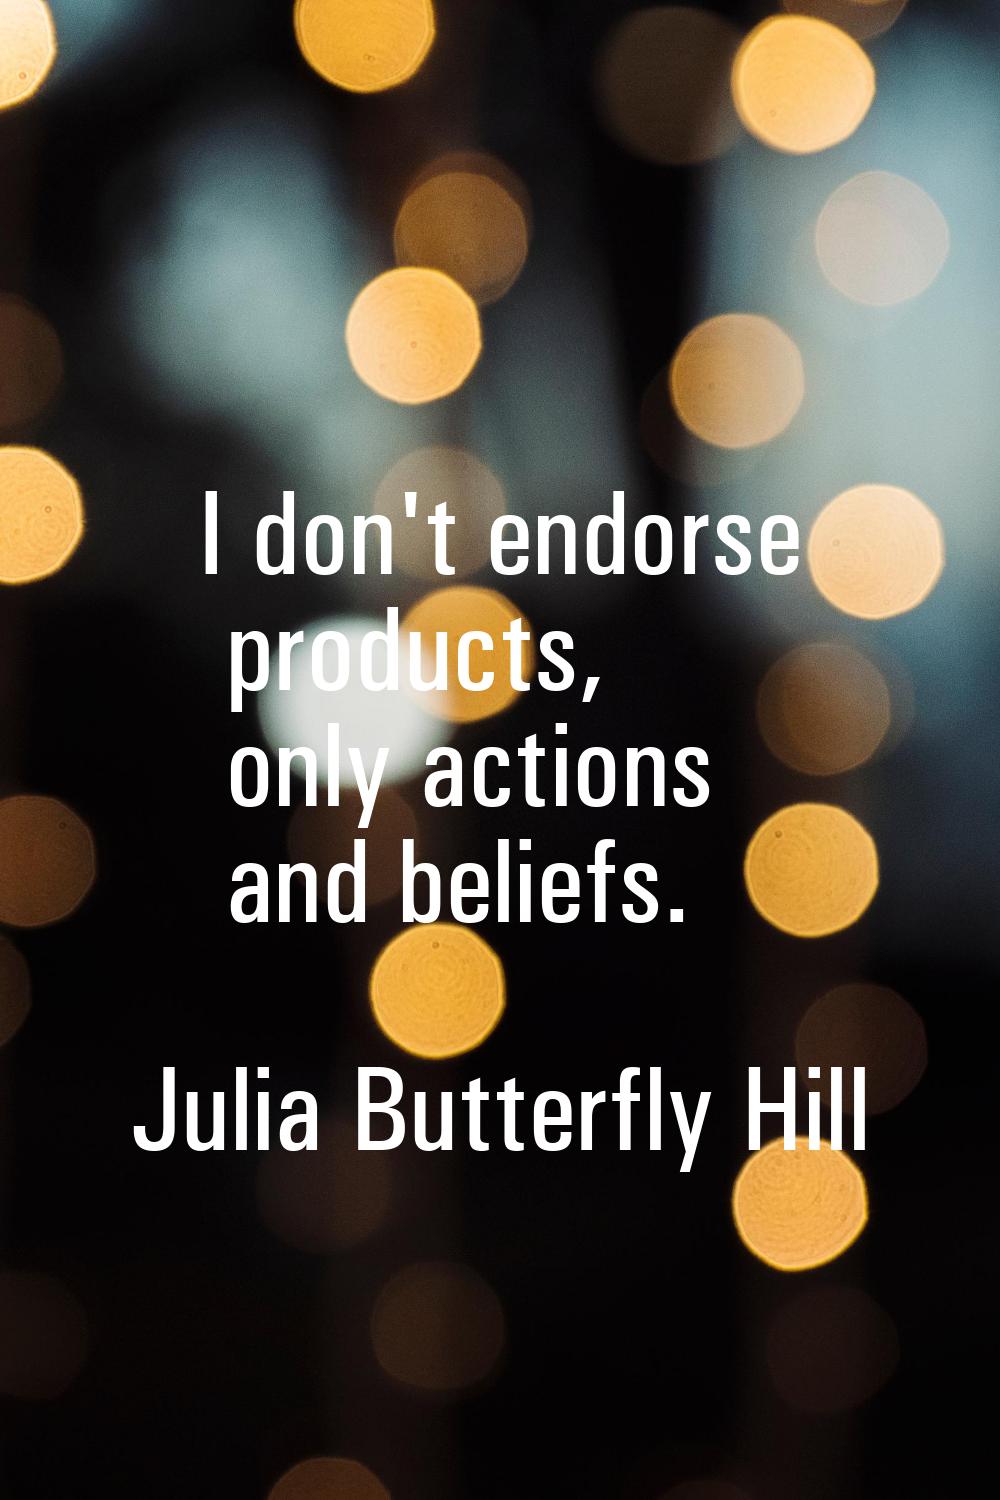 I don't endorse products, only actions and beliefs.